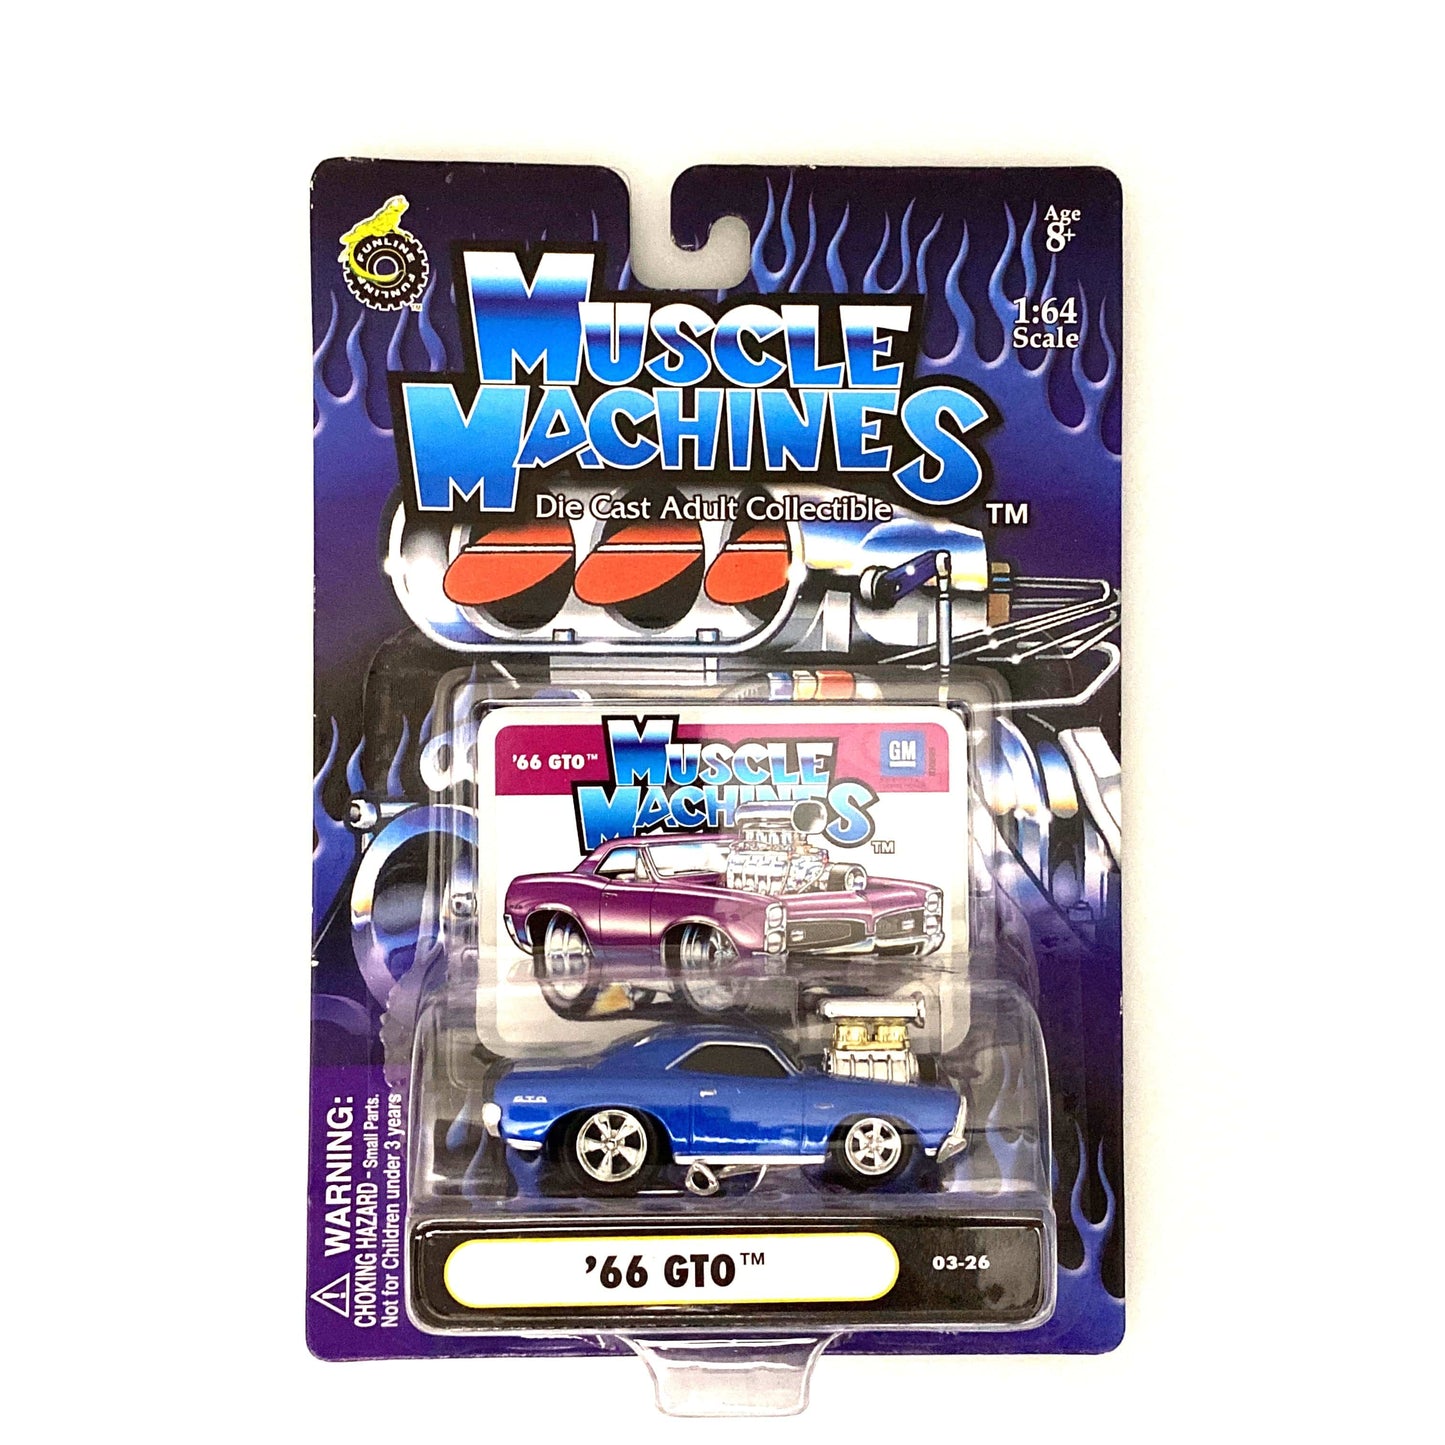 Muscle Machines '66 GTO Blue Diecast Collectible Car 1:64 Scale Model #03-26